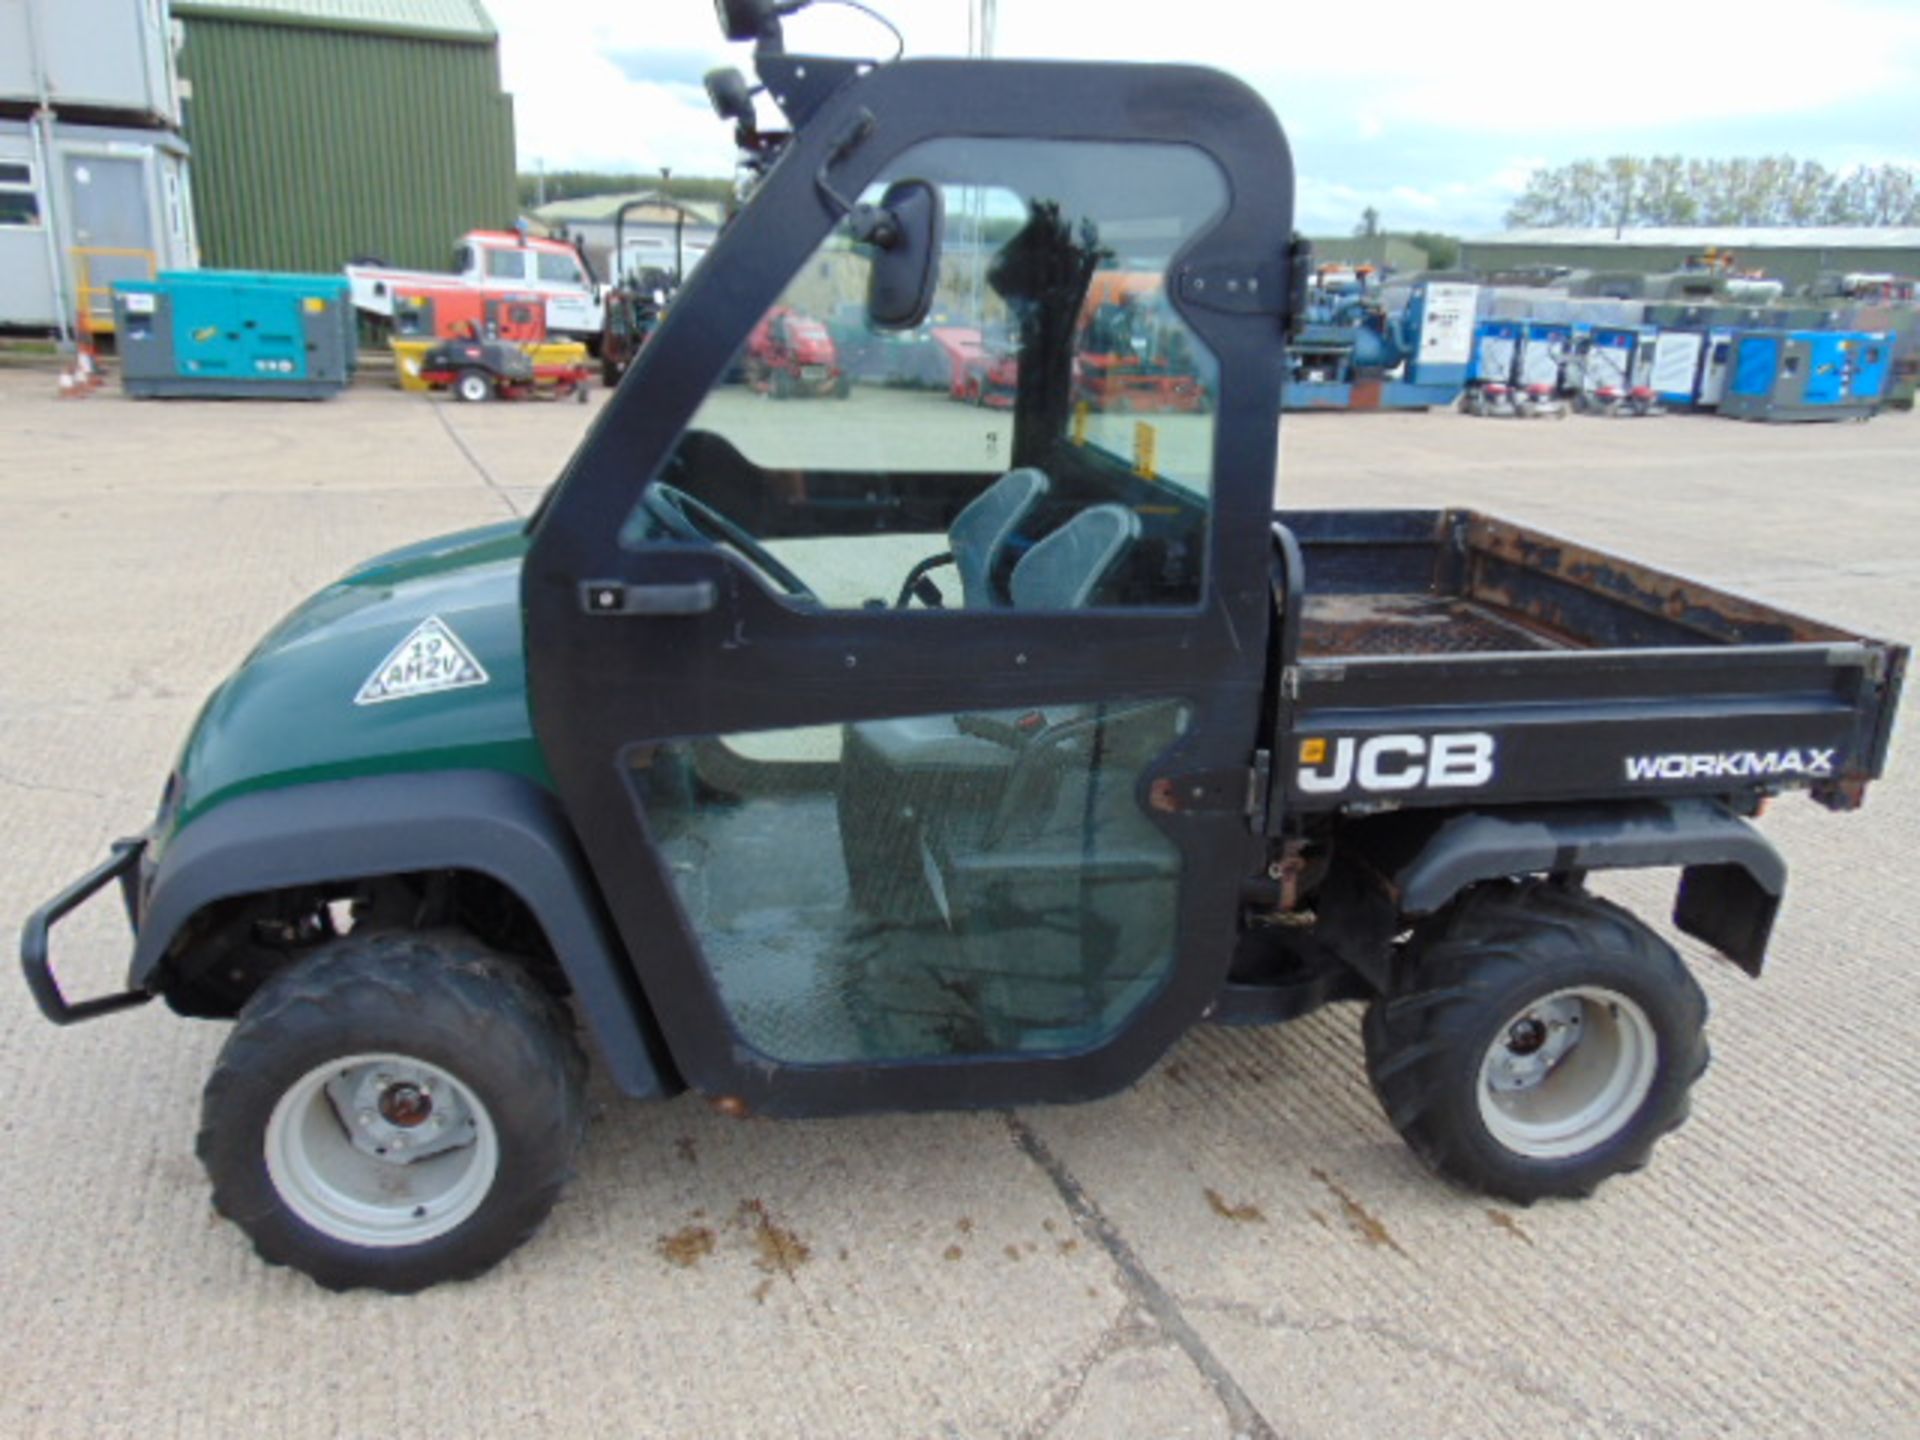 2015 JCB Workmax 1000D 4WD Diesel with rear tipping body and power steering 838 hours ONLY - Image 4 of 11